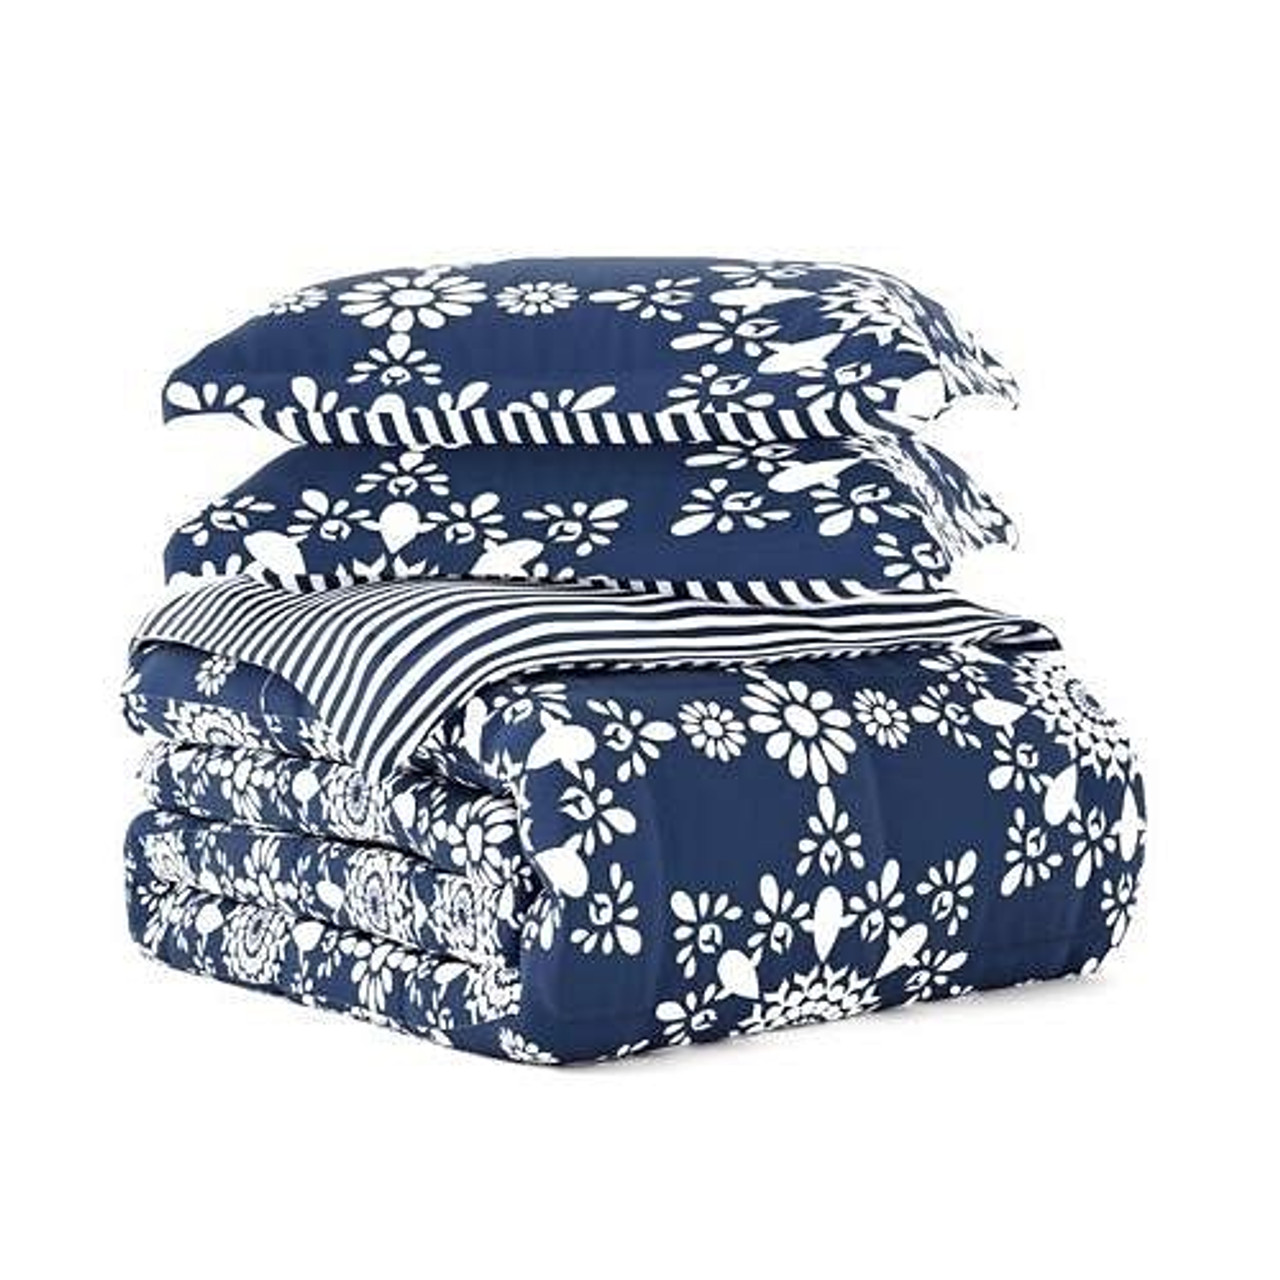 Full/Queen size 3-Piece Navy Blue White Reversible Floral Striped Comforter Set